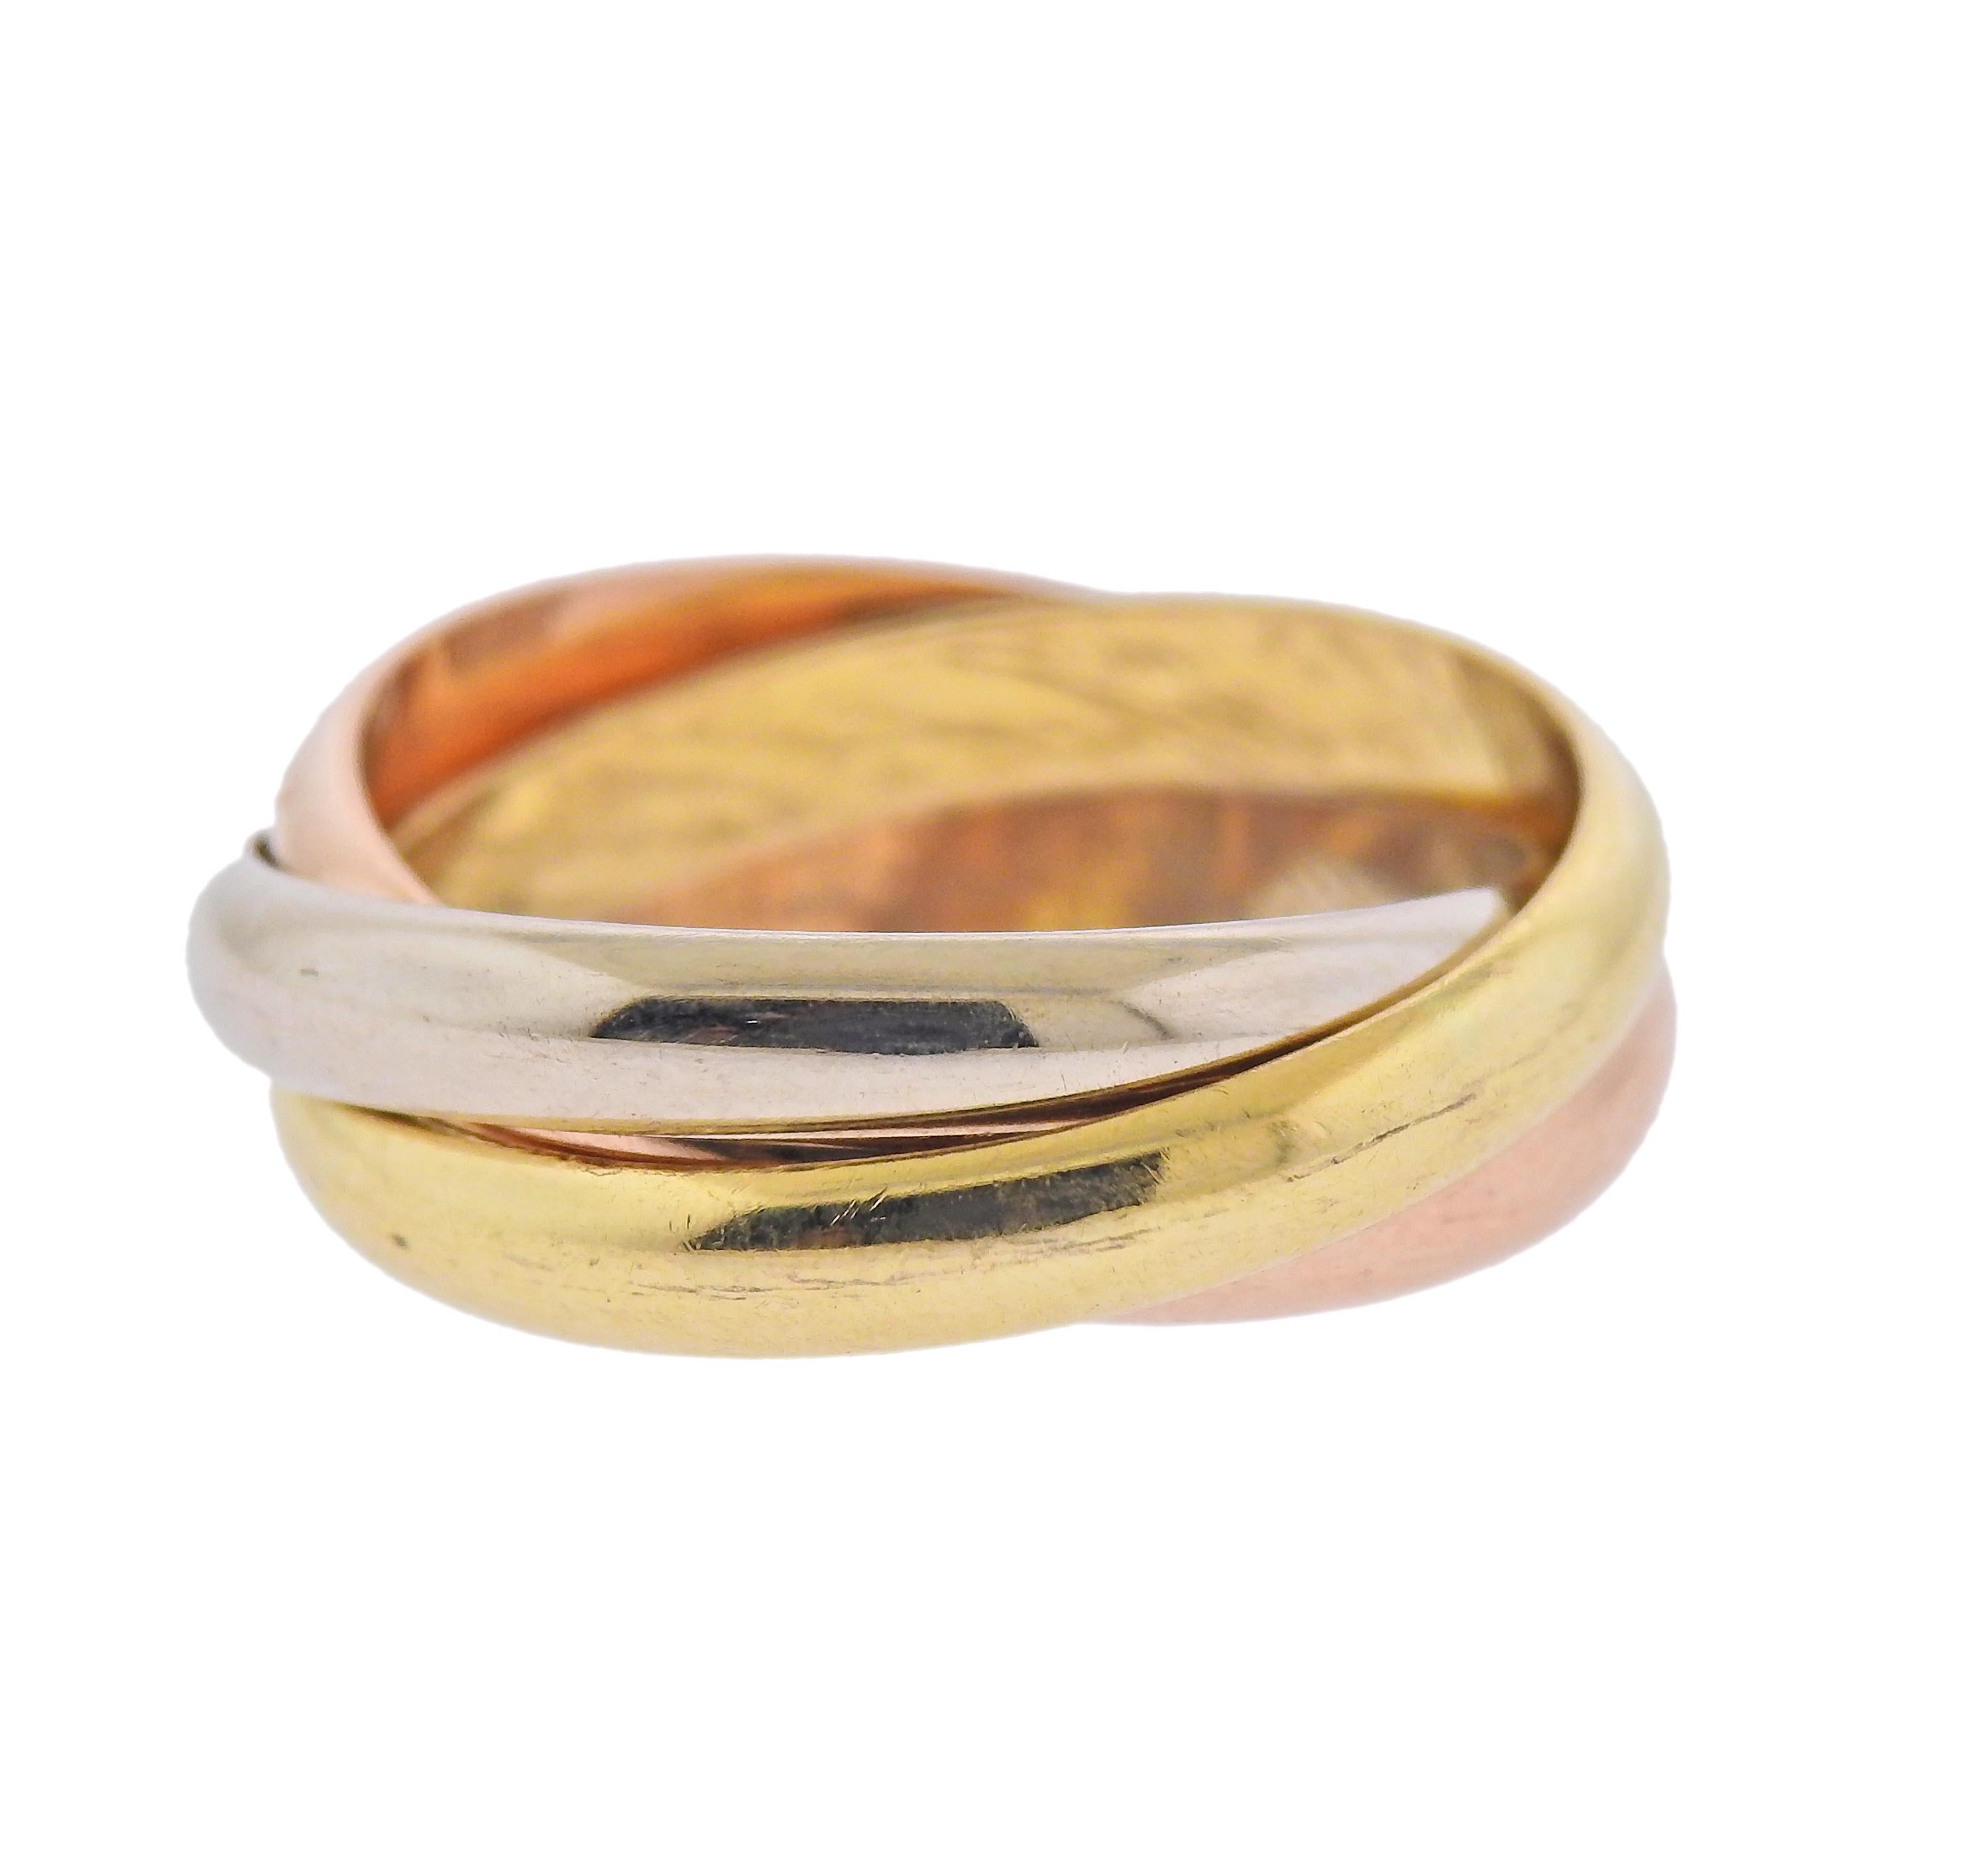 Signature Cartier Trinity 18k rose, white and yellow gold ring. Size 9.25, (Cartier French size 61). Marked: le must deCartier, 61, 750. Weight - 10.4 grams.